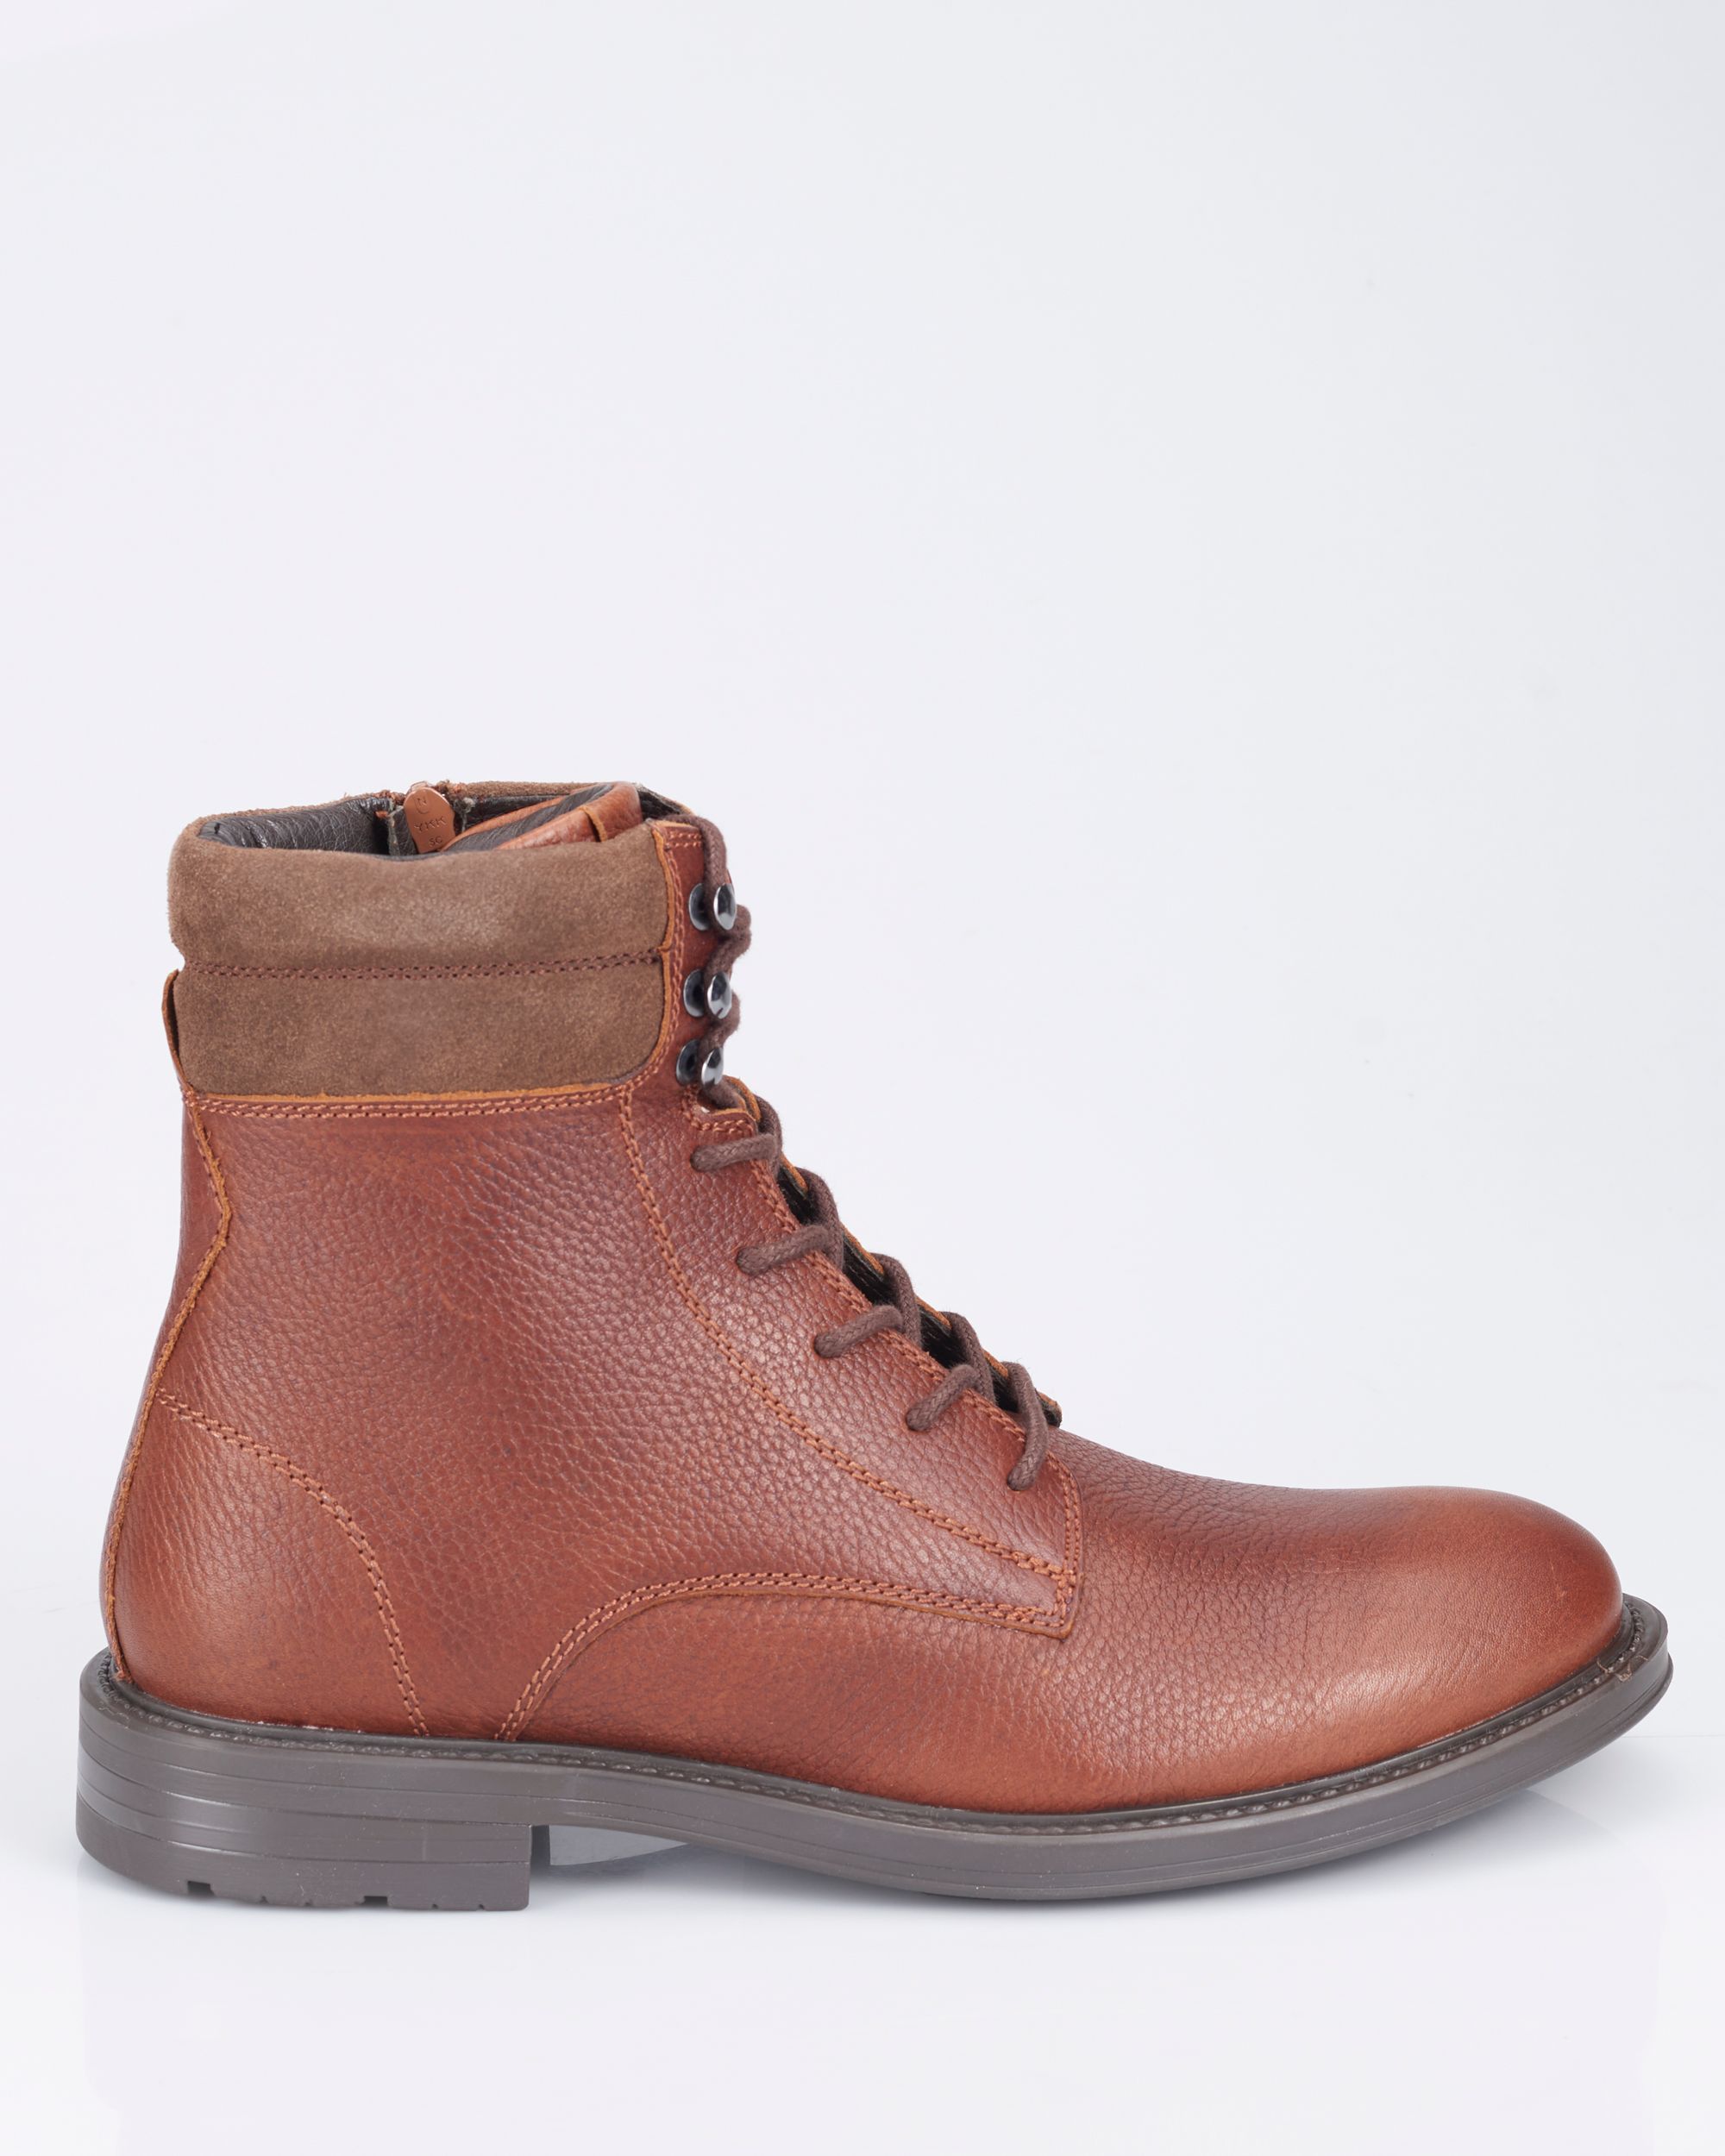 Campbell Classic Boots Chestnut 088302-001-41